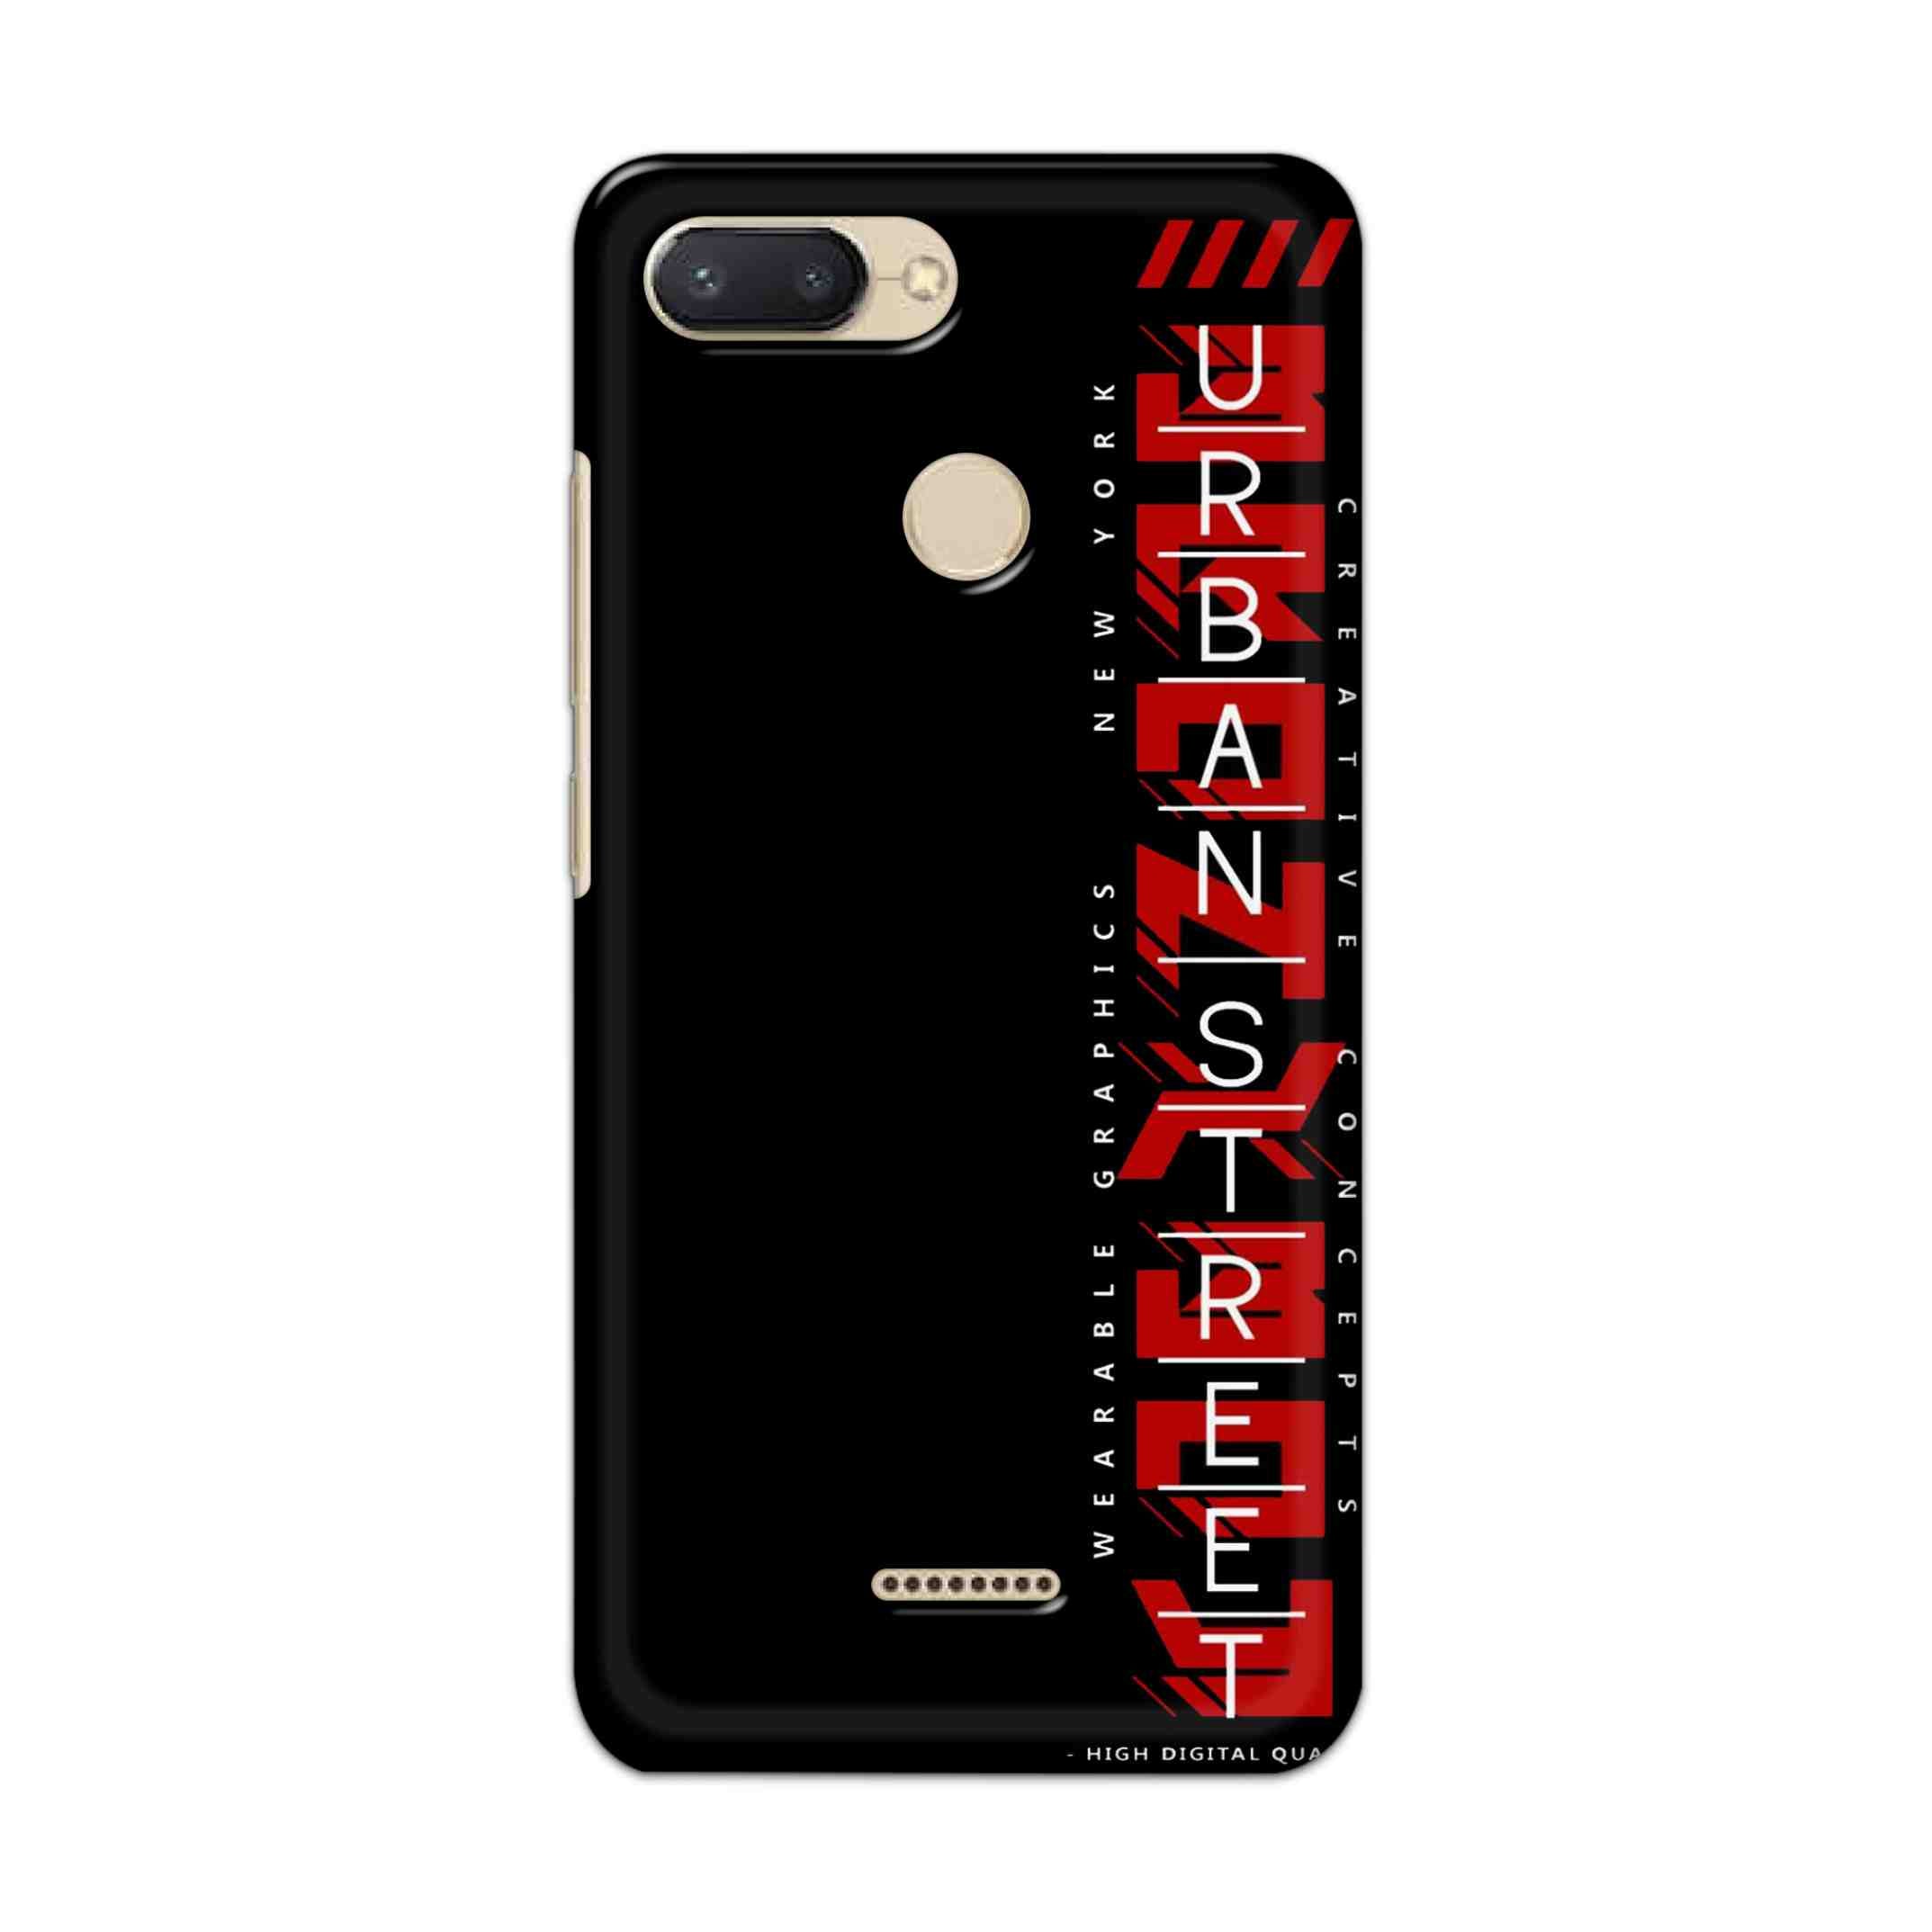 Buy Urban Street Hard Back Mobile Phone Case/Cover For Xiaomi Redmi 6 Online